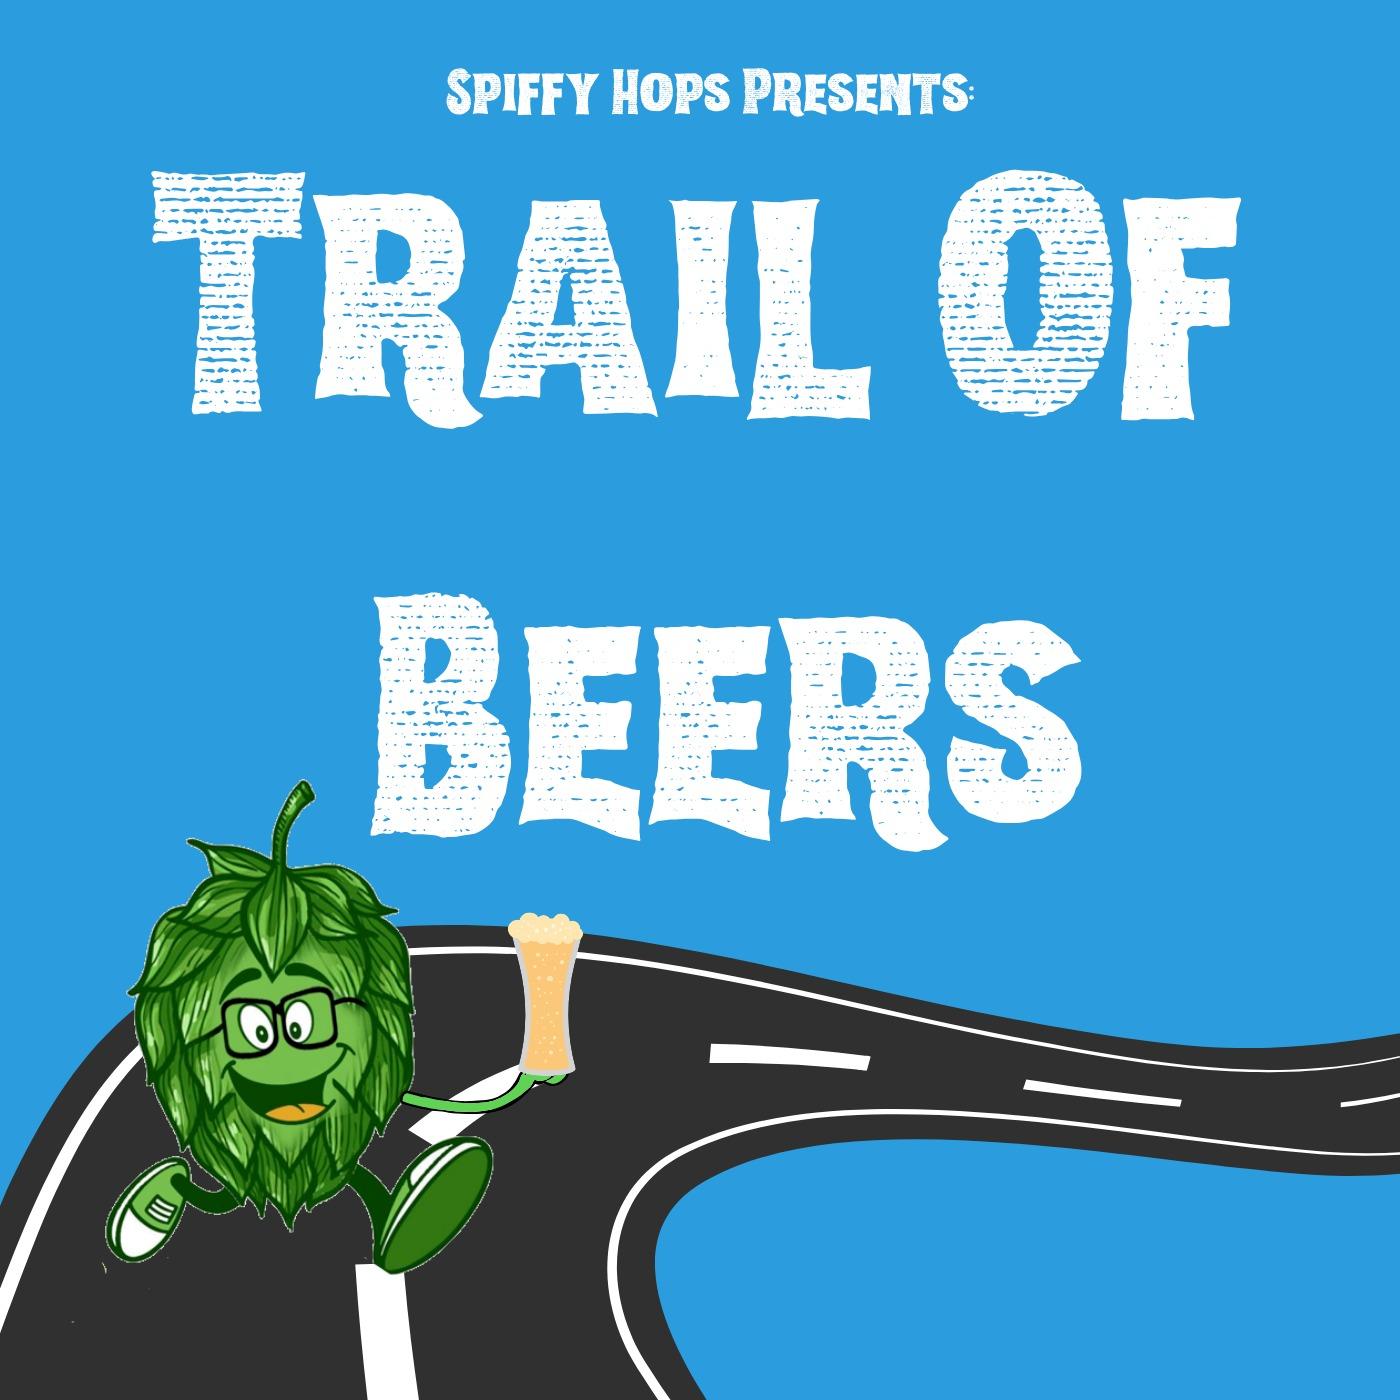 Spiffy Hops Trail of Beers